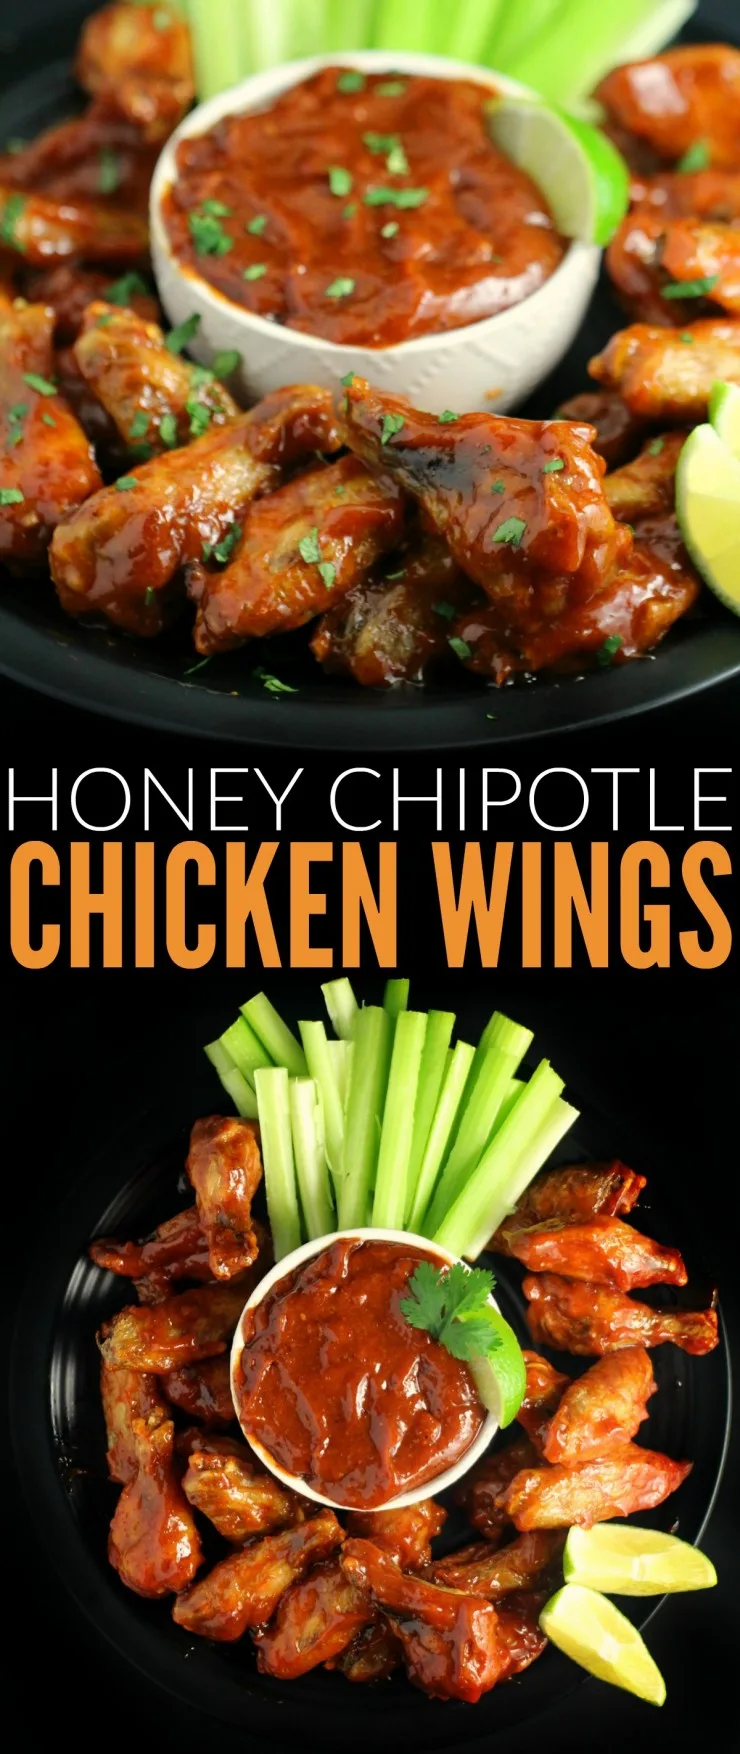 These Honey Chipotle Chicken Wings are a little bit sweet with a touch of sweet. They are guaranteed to fly off plate at any party you serve this delicious appetizer at.